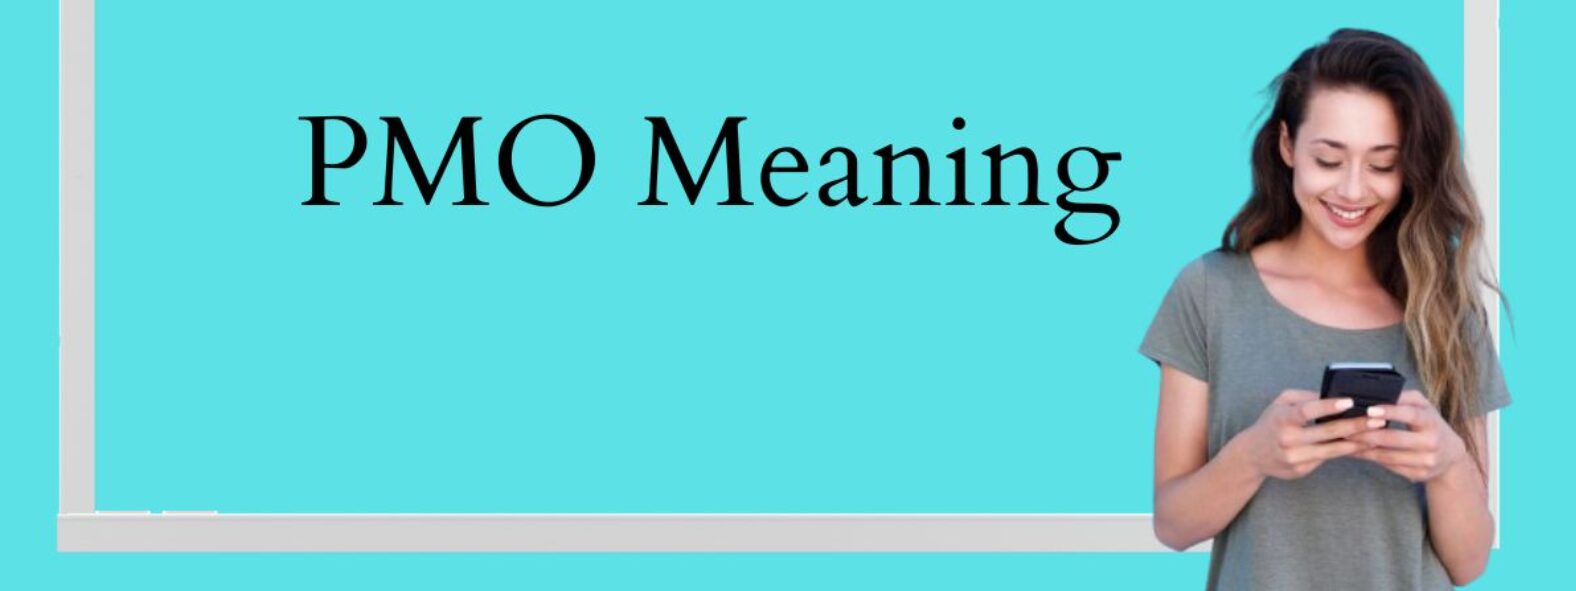 pmo meaning snapchat